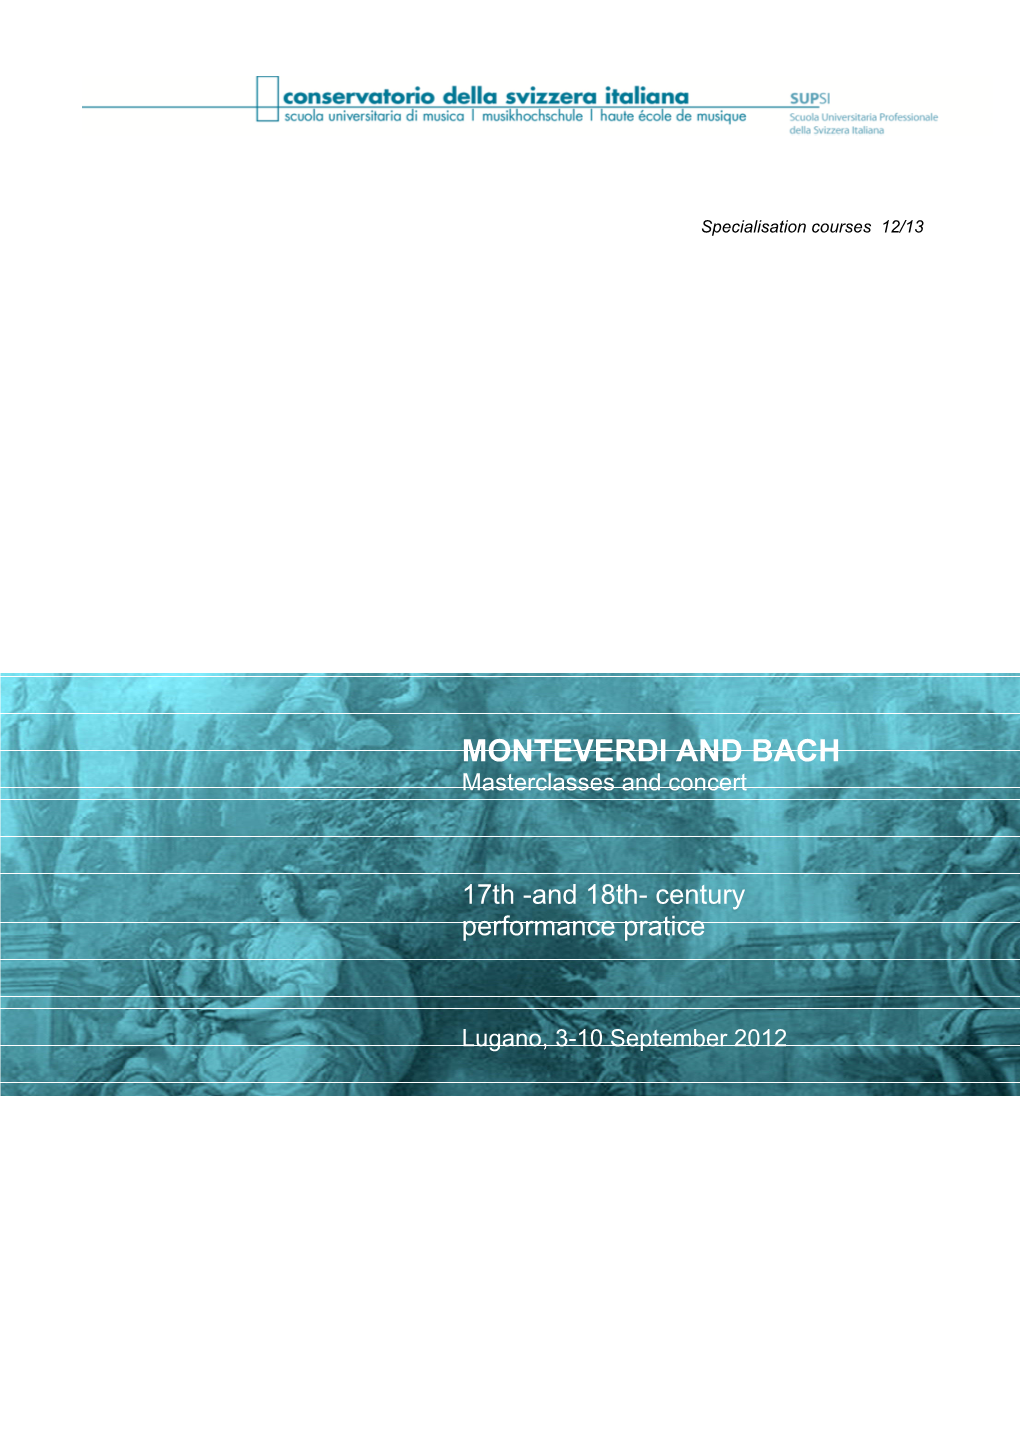 MONTEVERDI and BACH Masterclasses and Concert